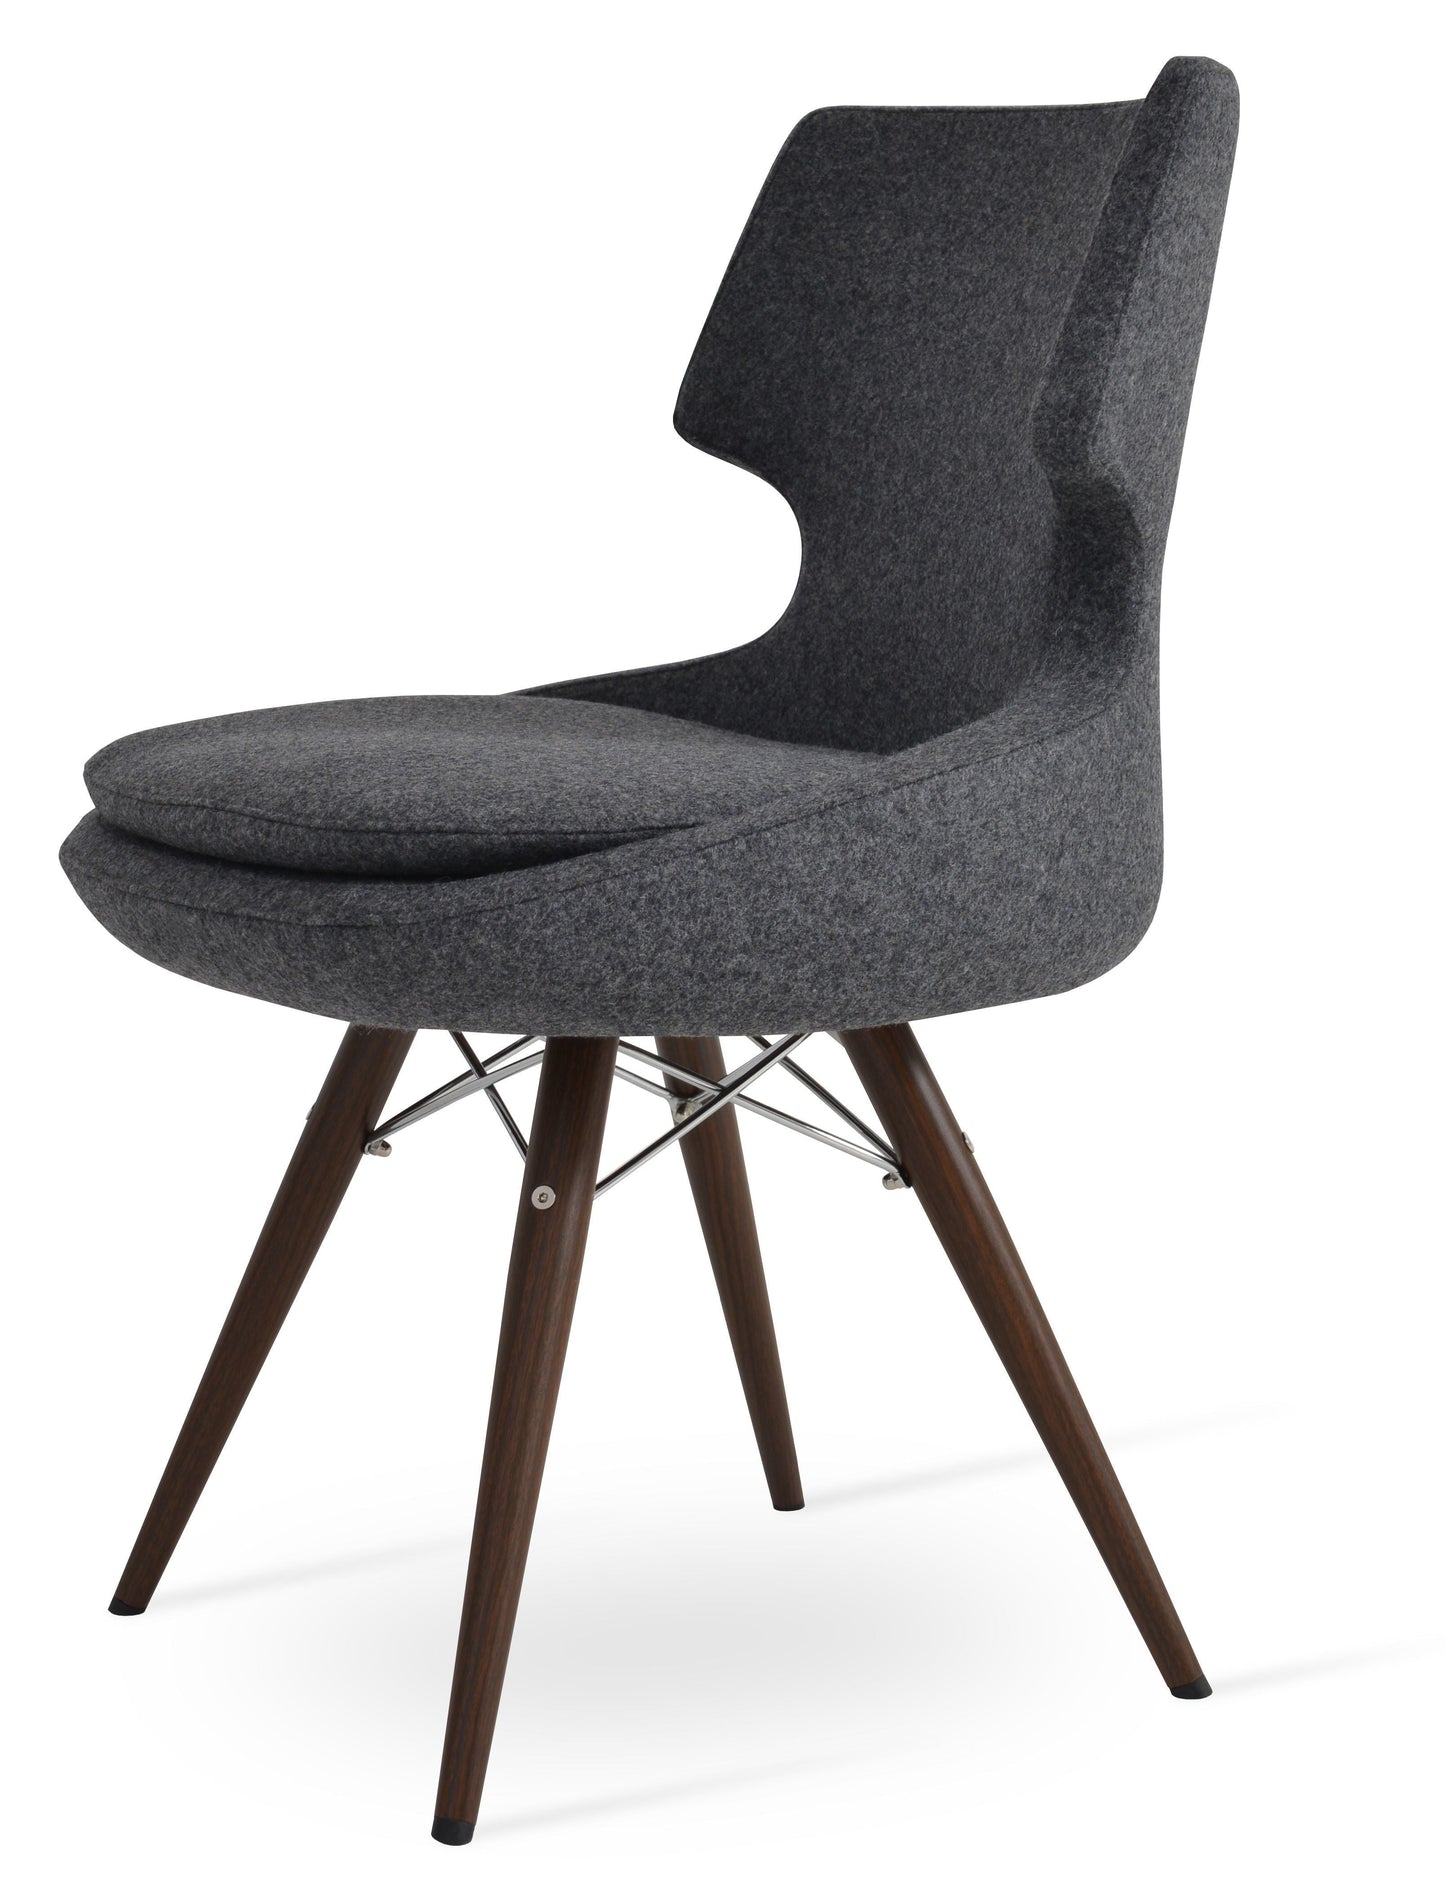 sohoConcept Patara MW Chair Fabric in Stainless Steel